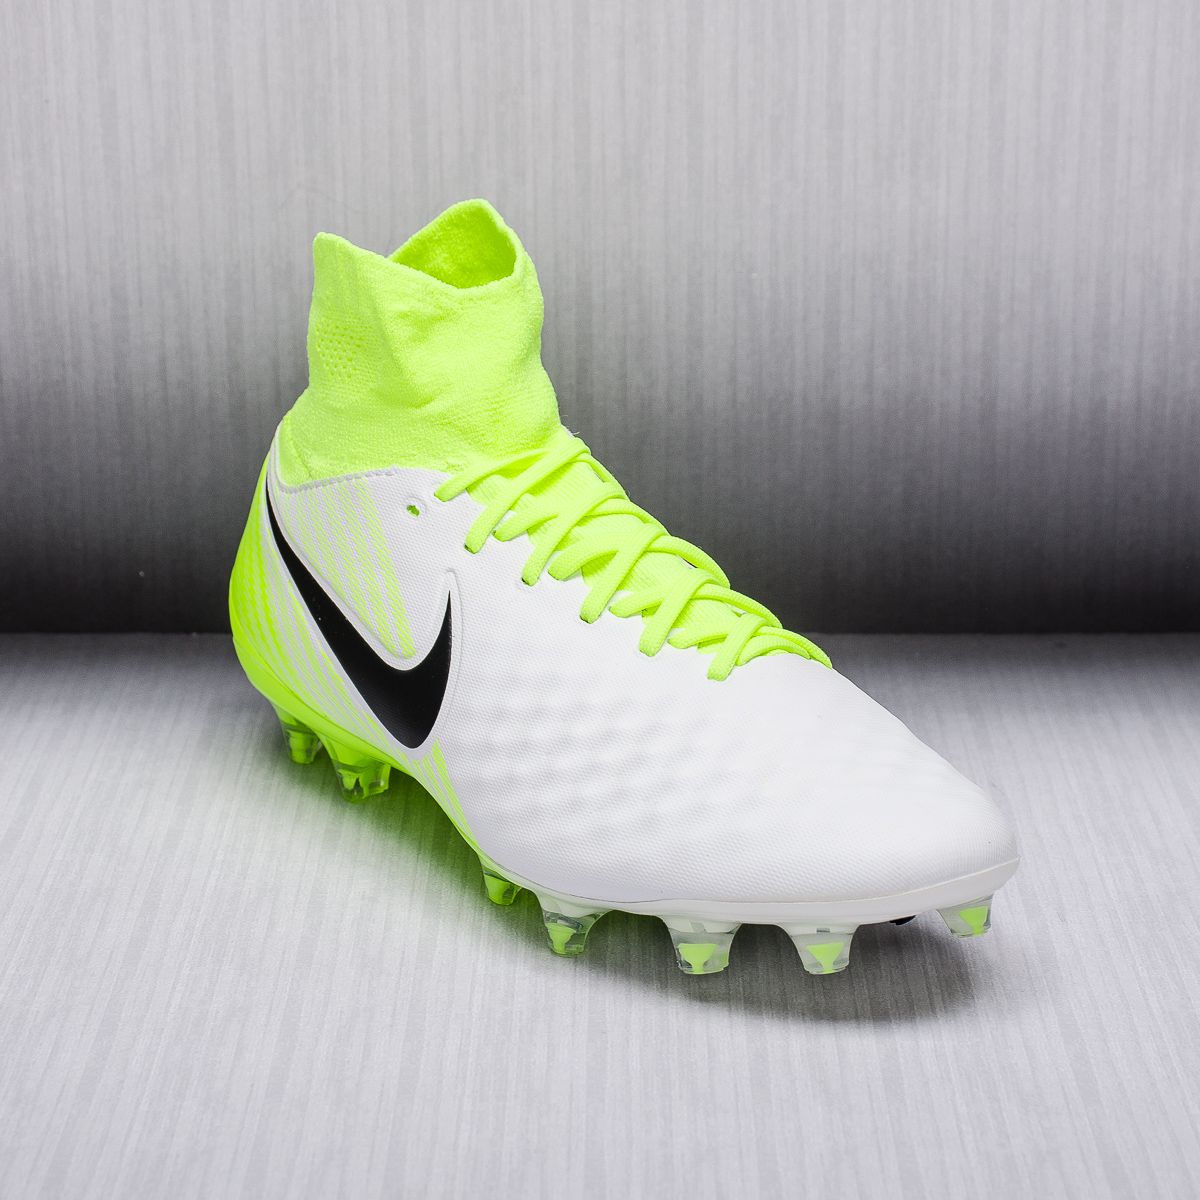 Nike Men's Magistax Finale Tf Black, Volt and White Sport